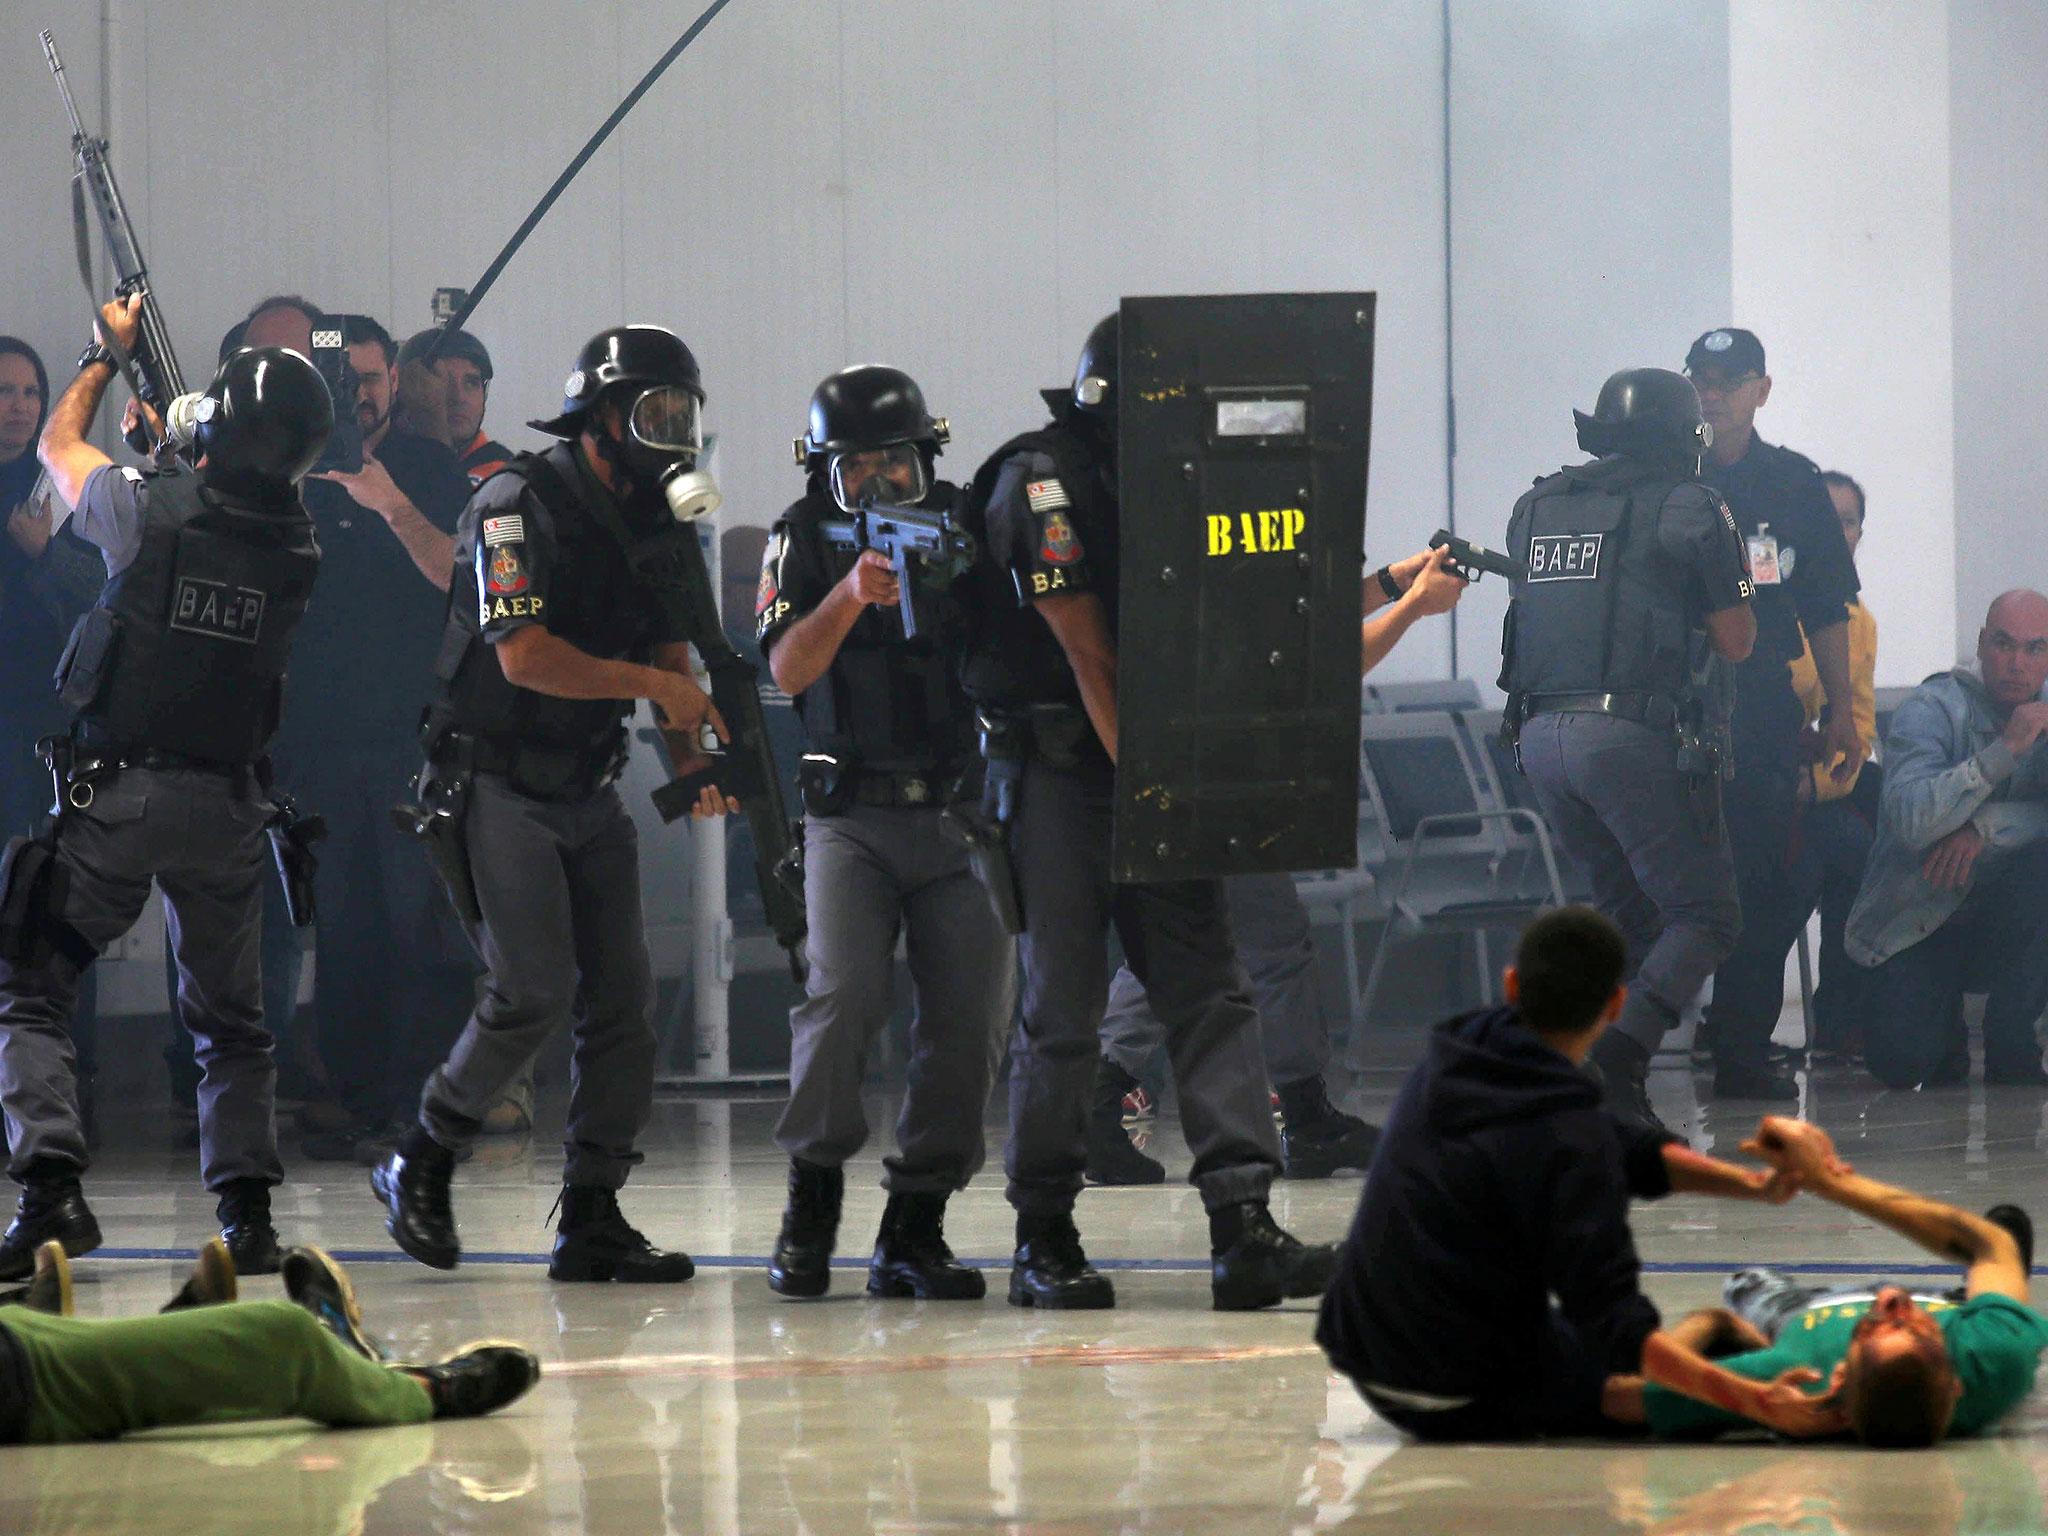 Sao Paulo state police take part in a simulated hostage situation during a security exercise ahead of the 2016 Rio Olympics